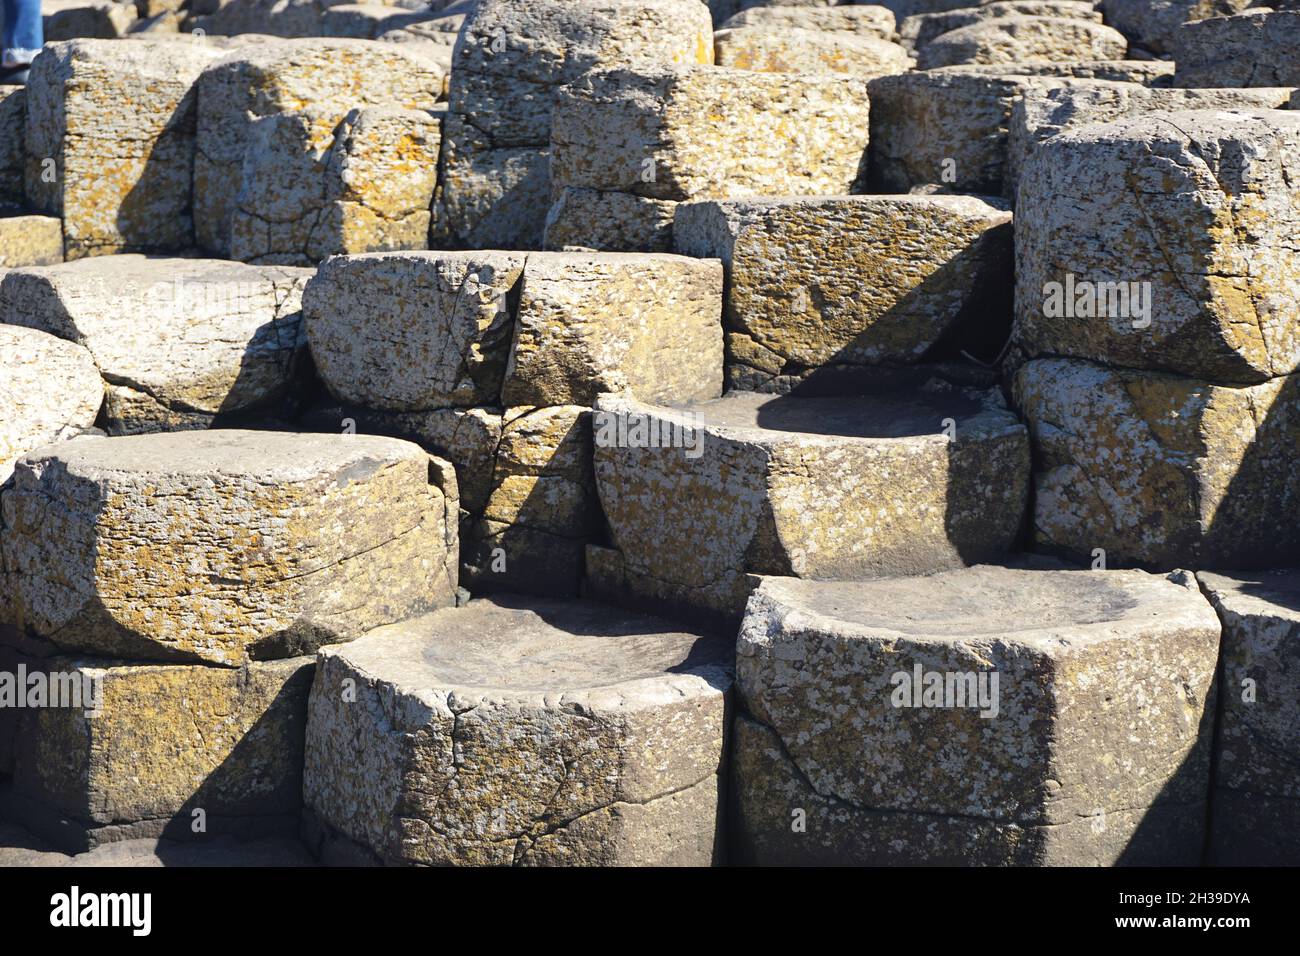 Closeup of natural volcanic rock formations with geometric shapes at the Giant’s Causeway, in County Antrim on the north coast of Northern Ireland. Stock Photo